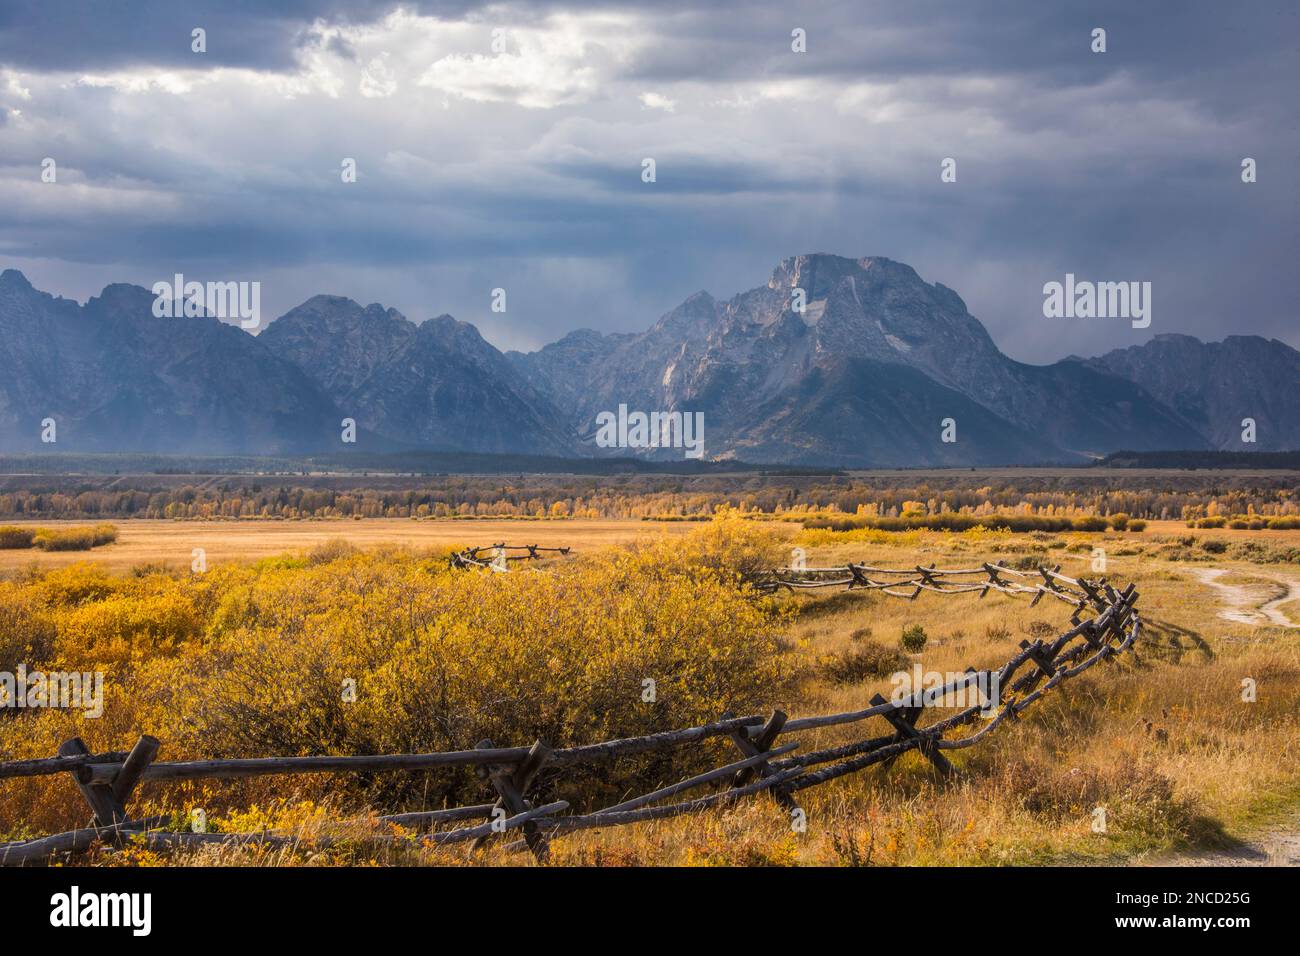 A storm clears over the Teton Range and Mt Moran as seen from historical Cunningham Cabin, Grand Teton National Park, Wyoming, USA Stock Photo